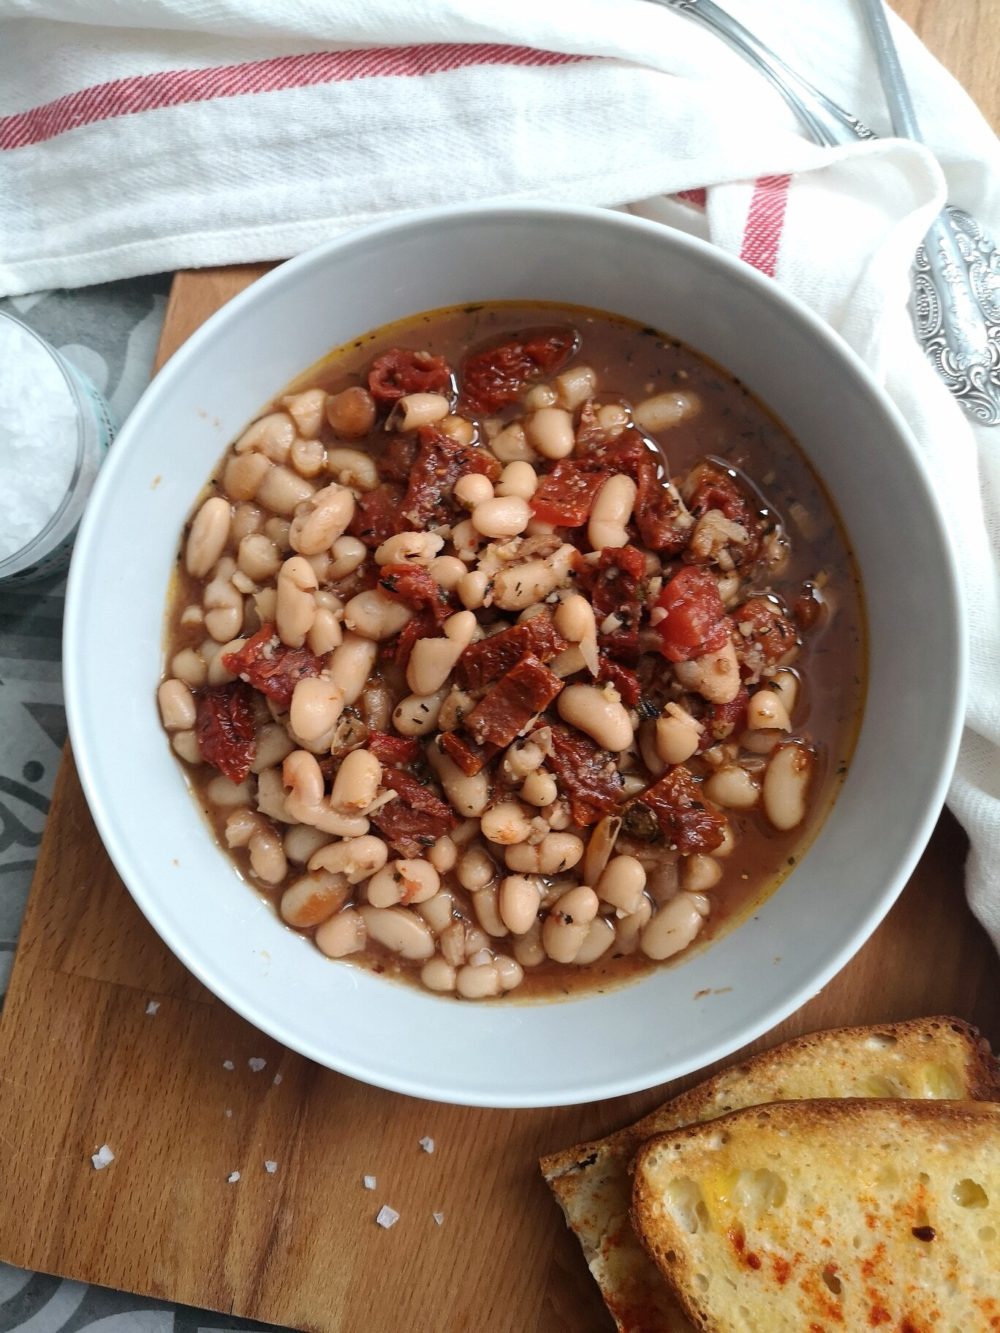 beans soup in a white dish on a table next to bread slices